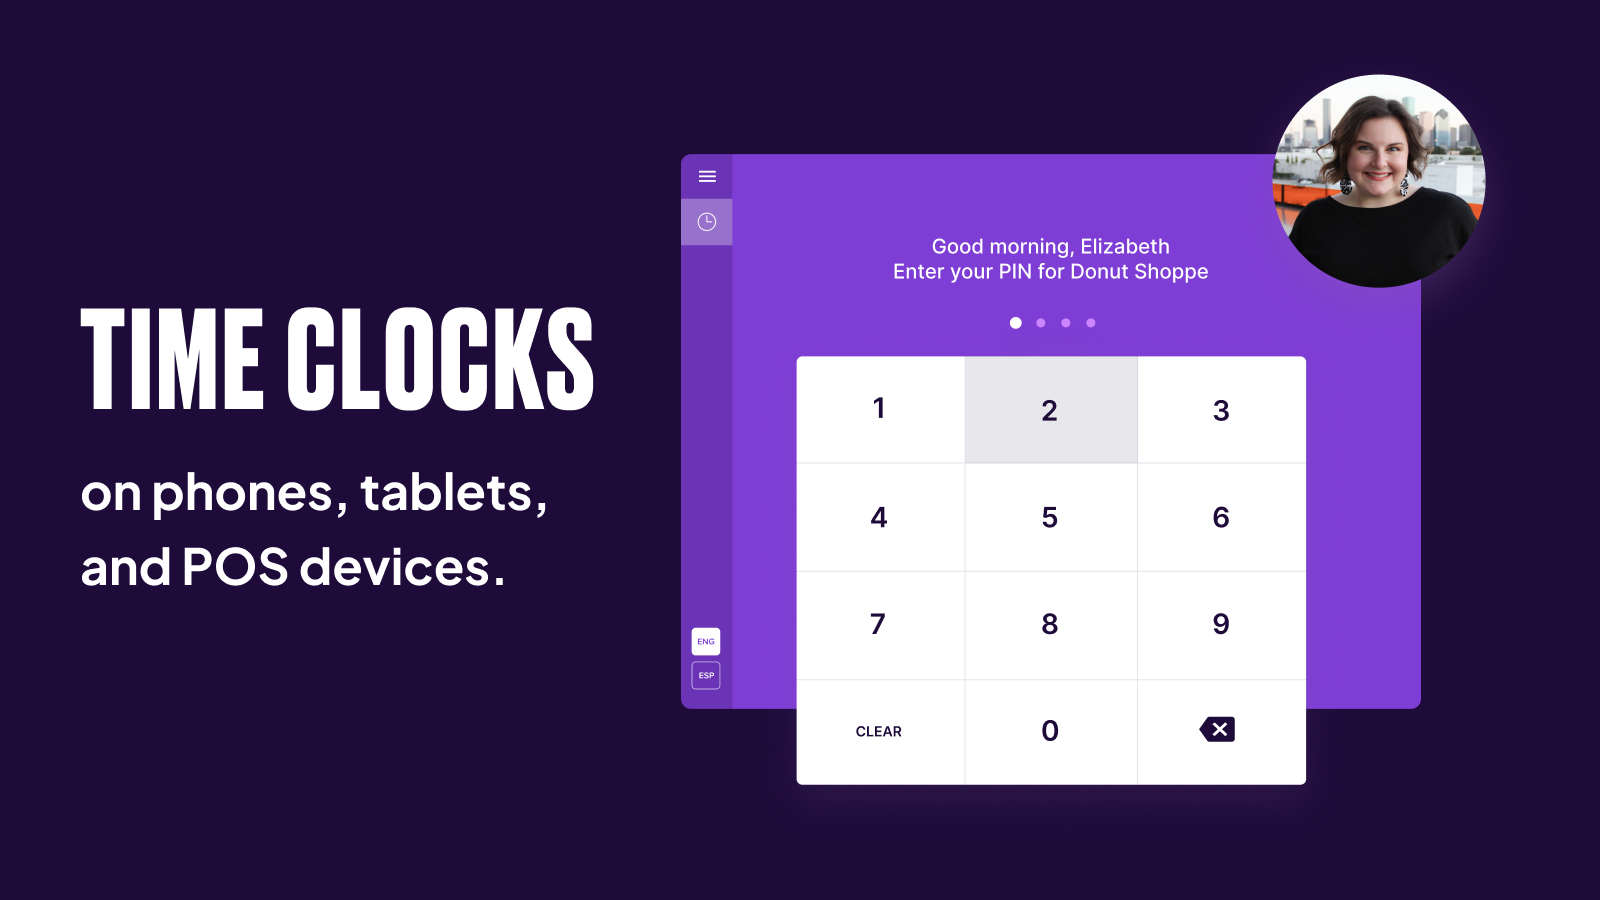 Time clock available in Shopify POS, web and mobile phones